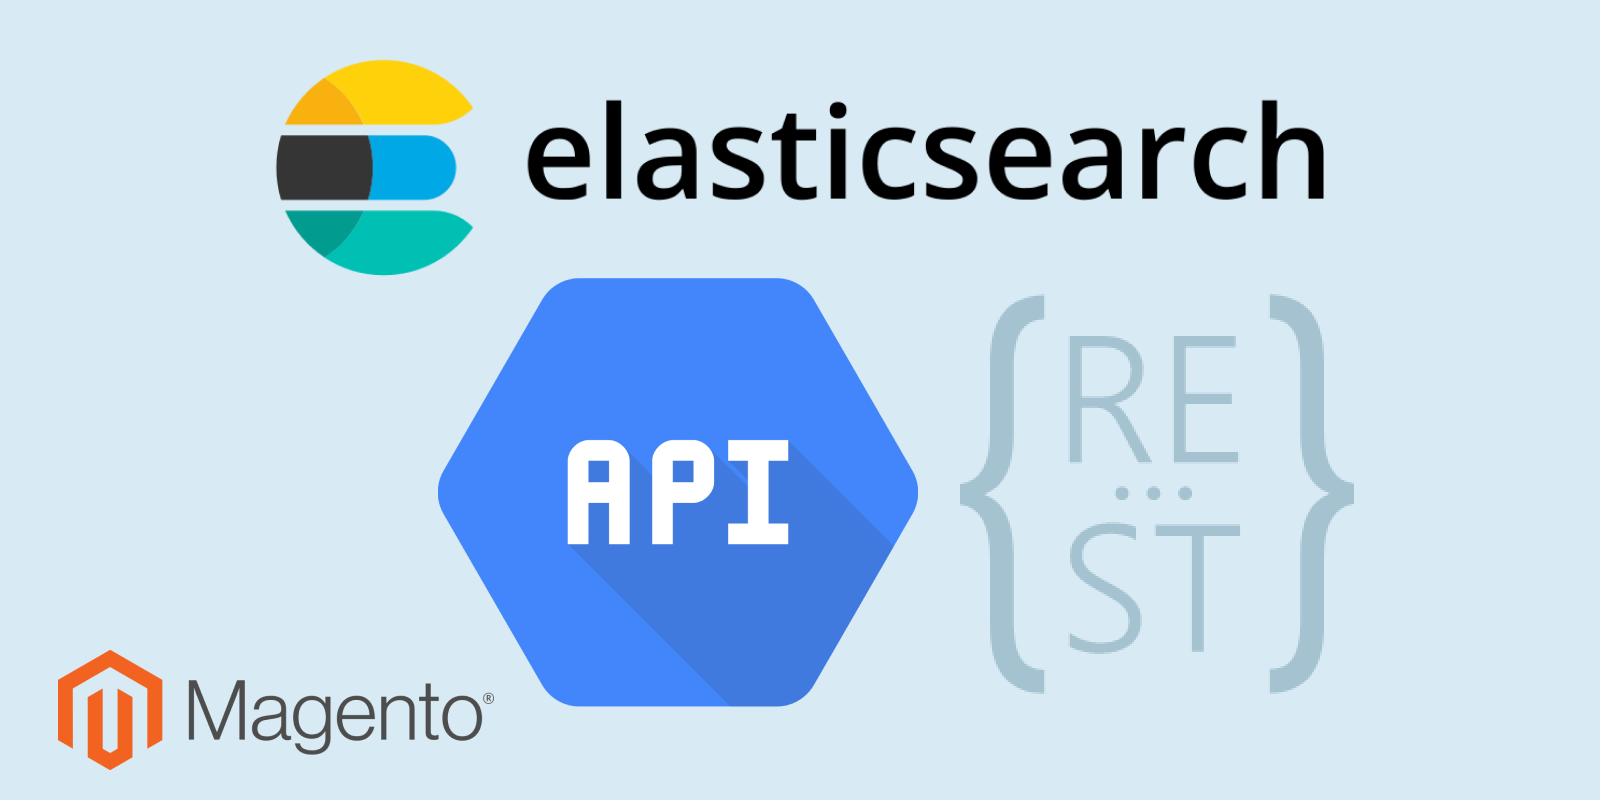 Magento and Elasticsearch REST API: The must-have developers’ toolset   